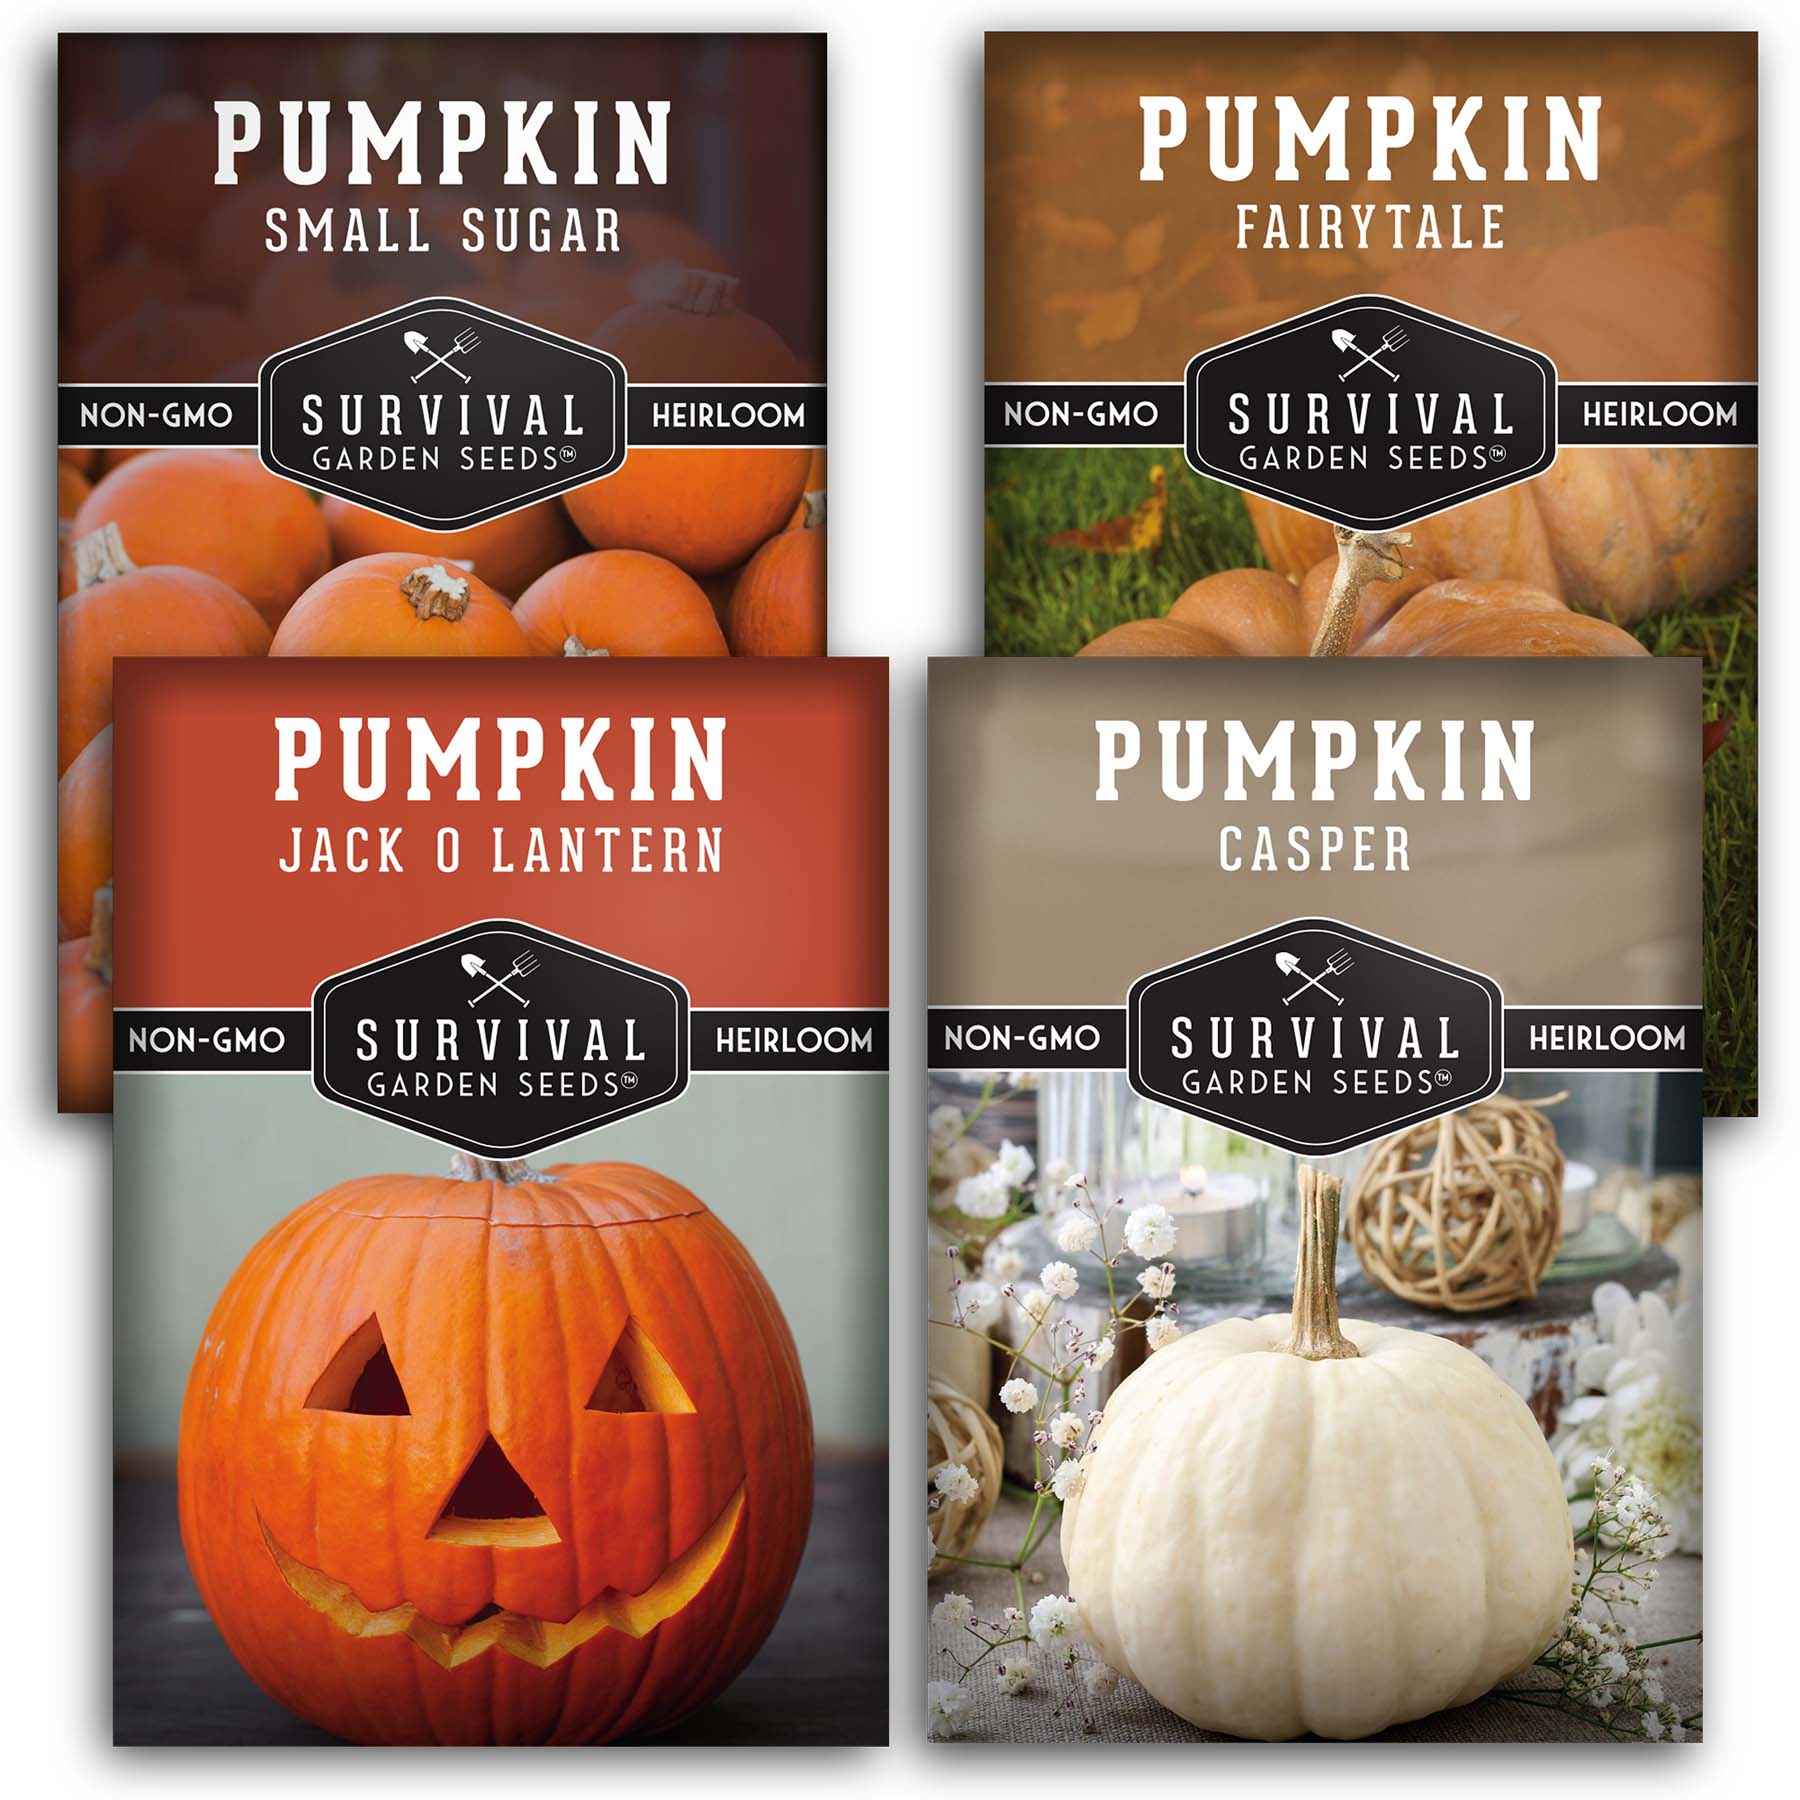 Pumpkin seed collection for planting